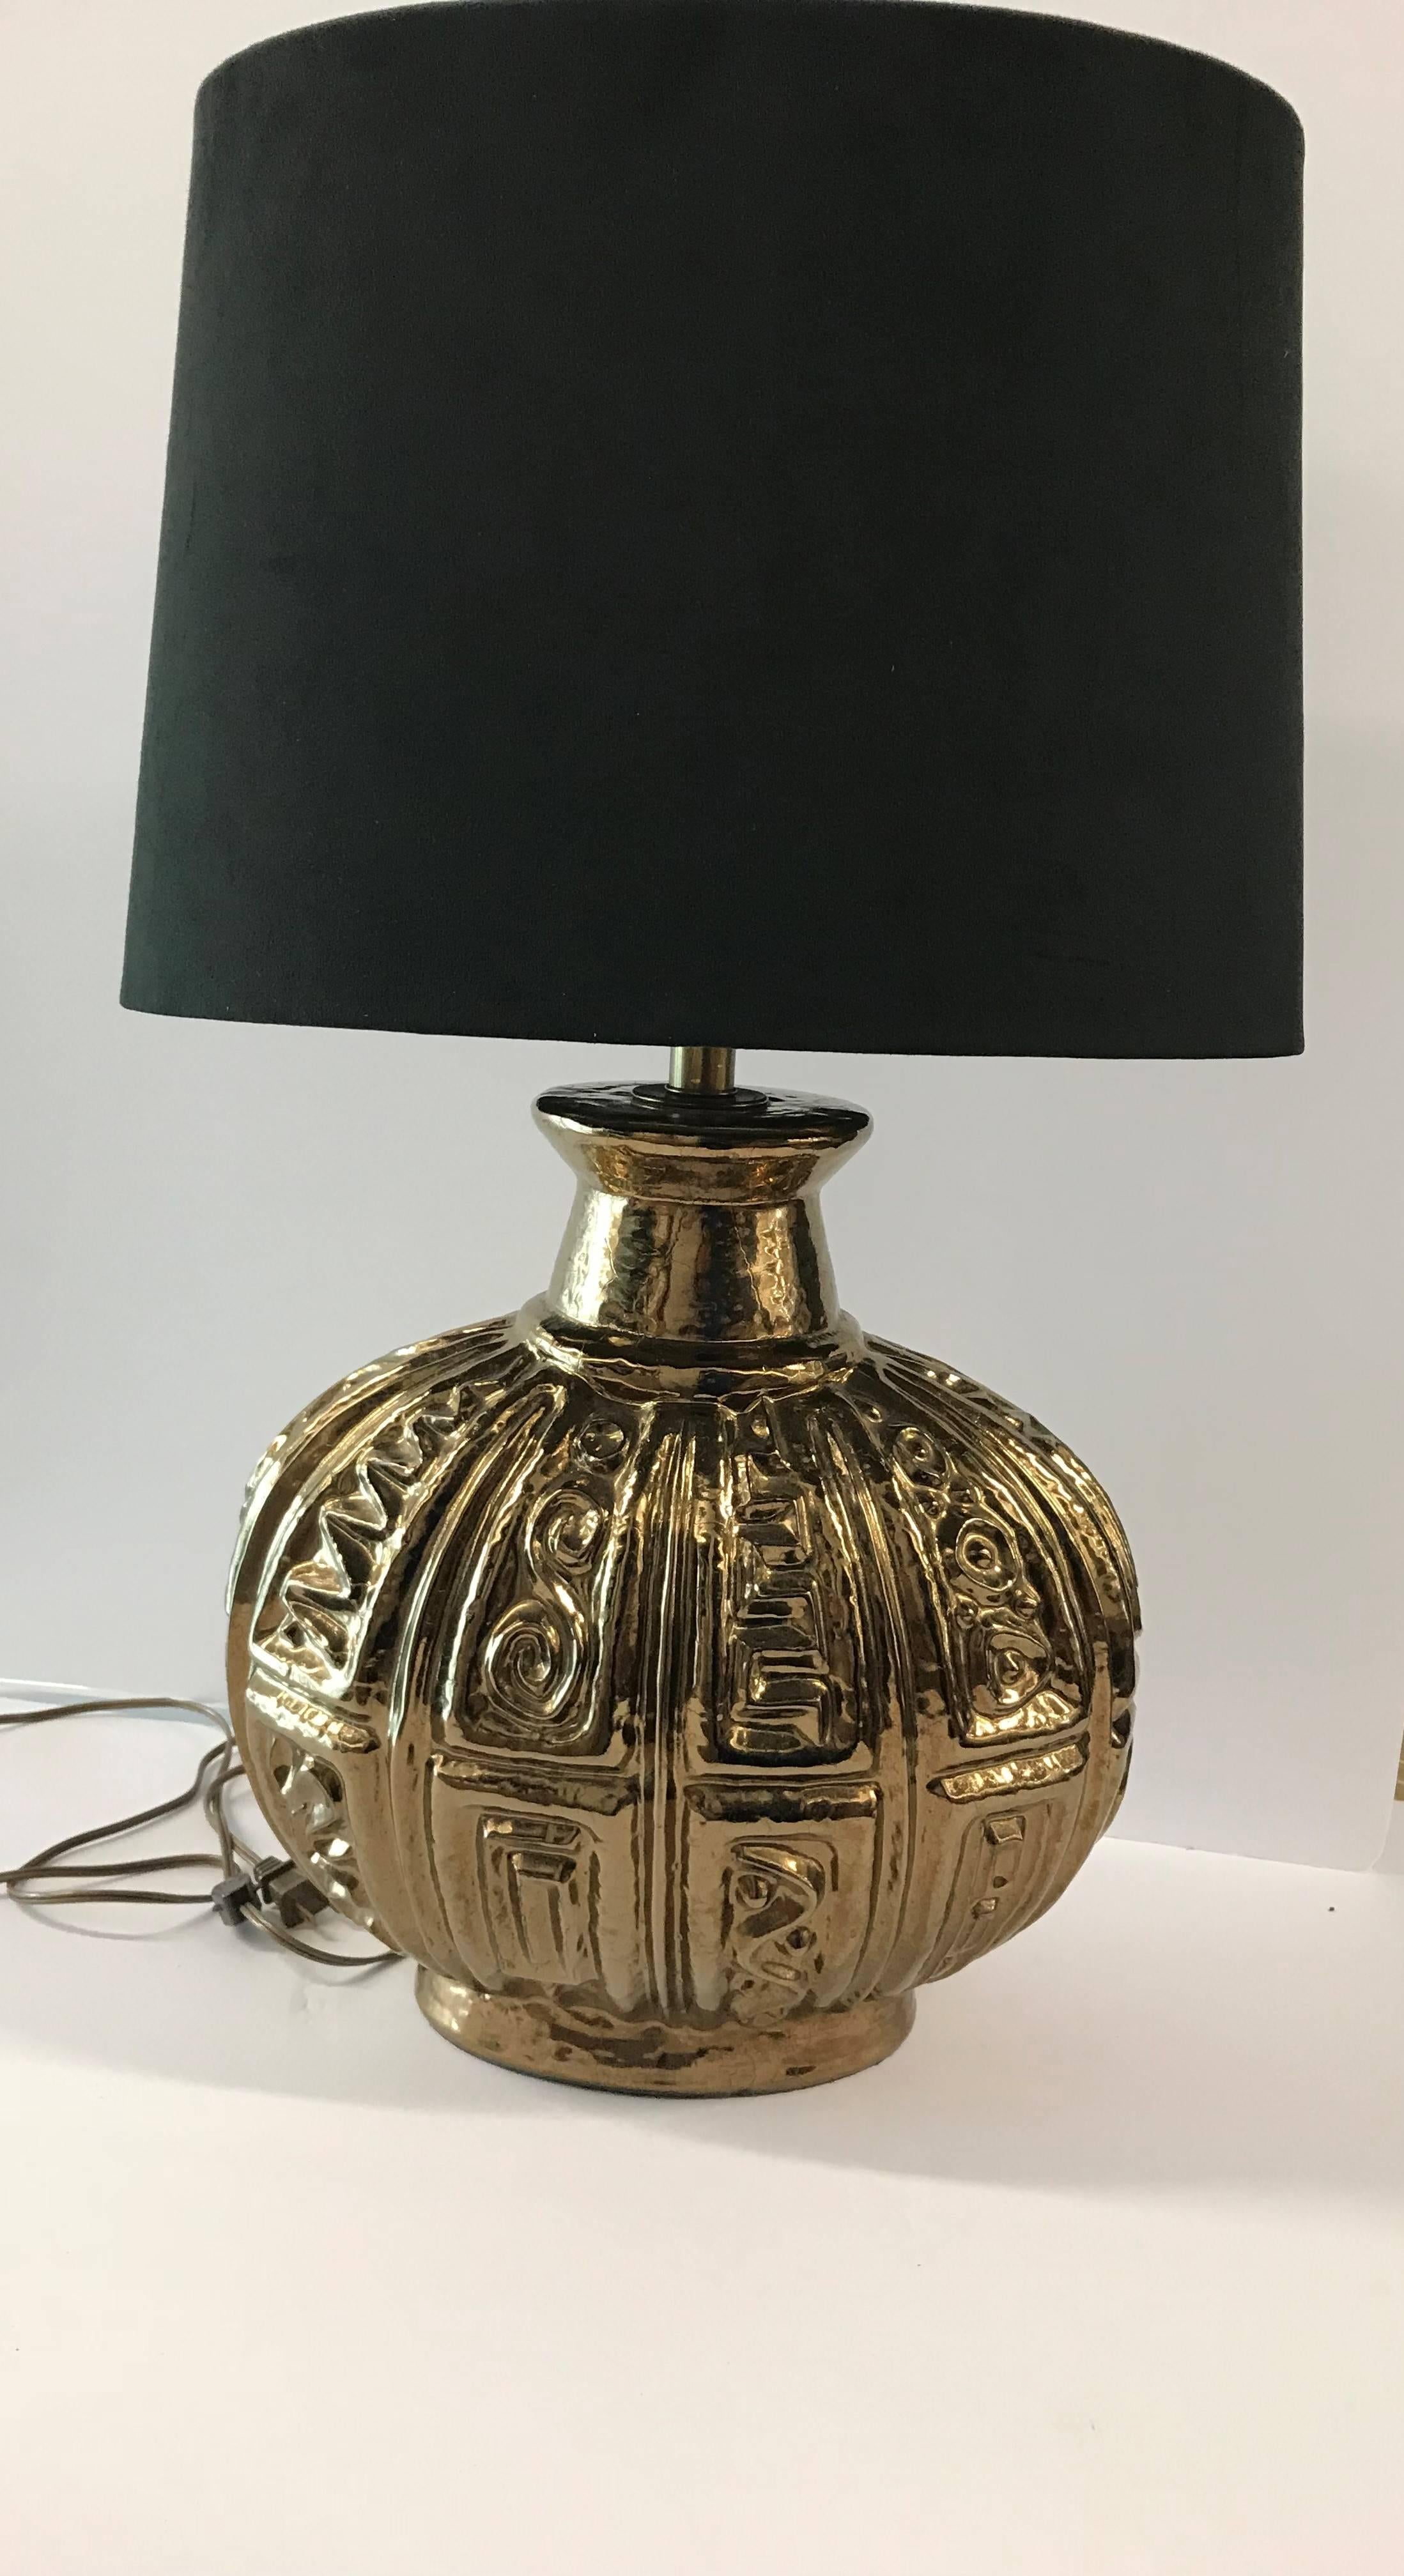 Midcentury American bronze ceramic lamp with custom chocolate brown suede shade, circa 1960. 




Dimensions: 29.75 inches H to top of harp; 20 inches H to light bulb socket
The gold base is 16 inches H x 14.5 inches W x 10 inches D
Base of